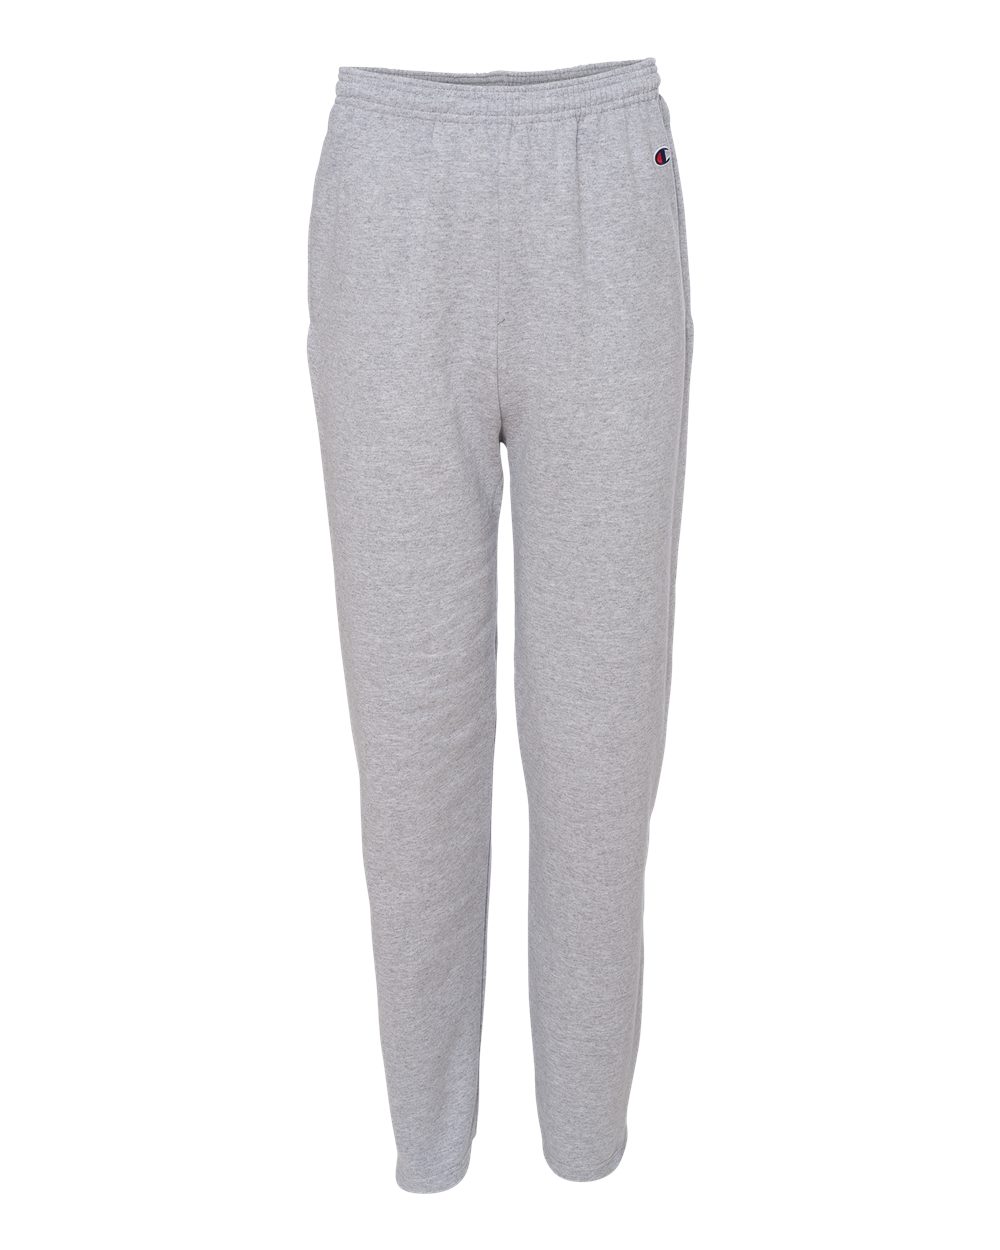 Champion P800 - Double Dry Eco Open Bottom Sweatpants with Pockets